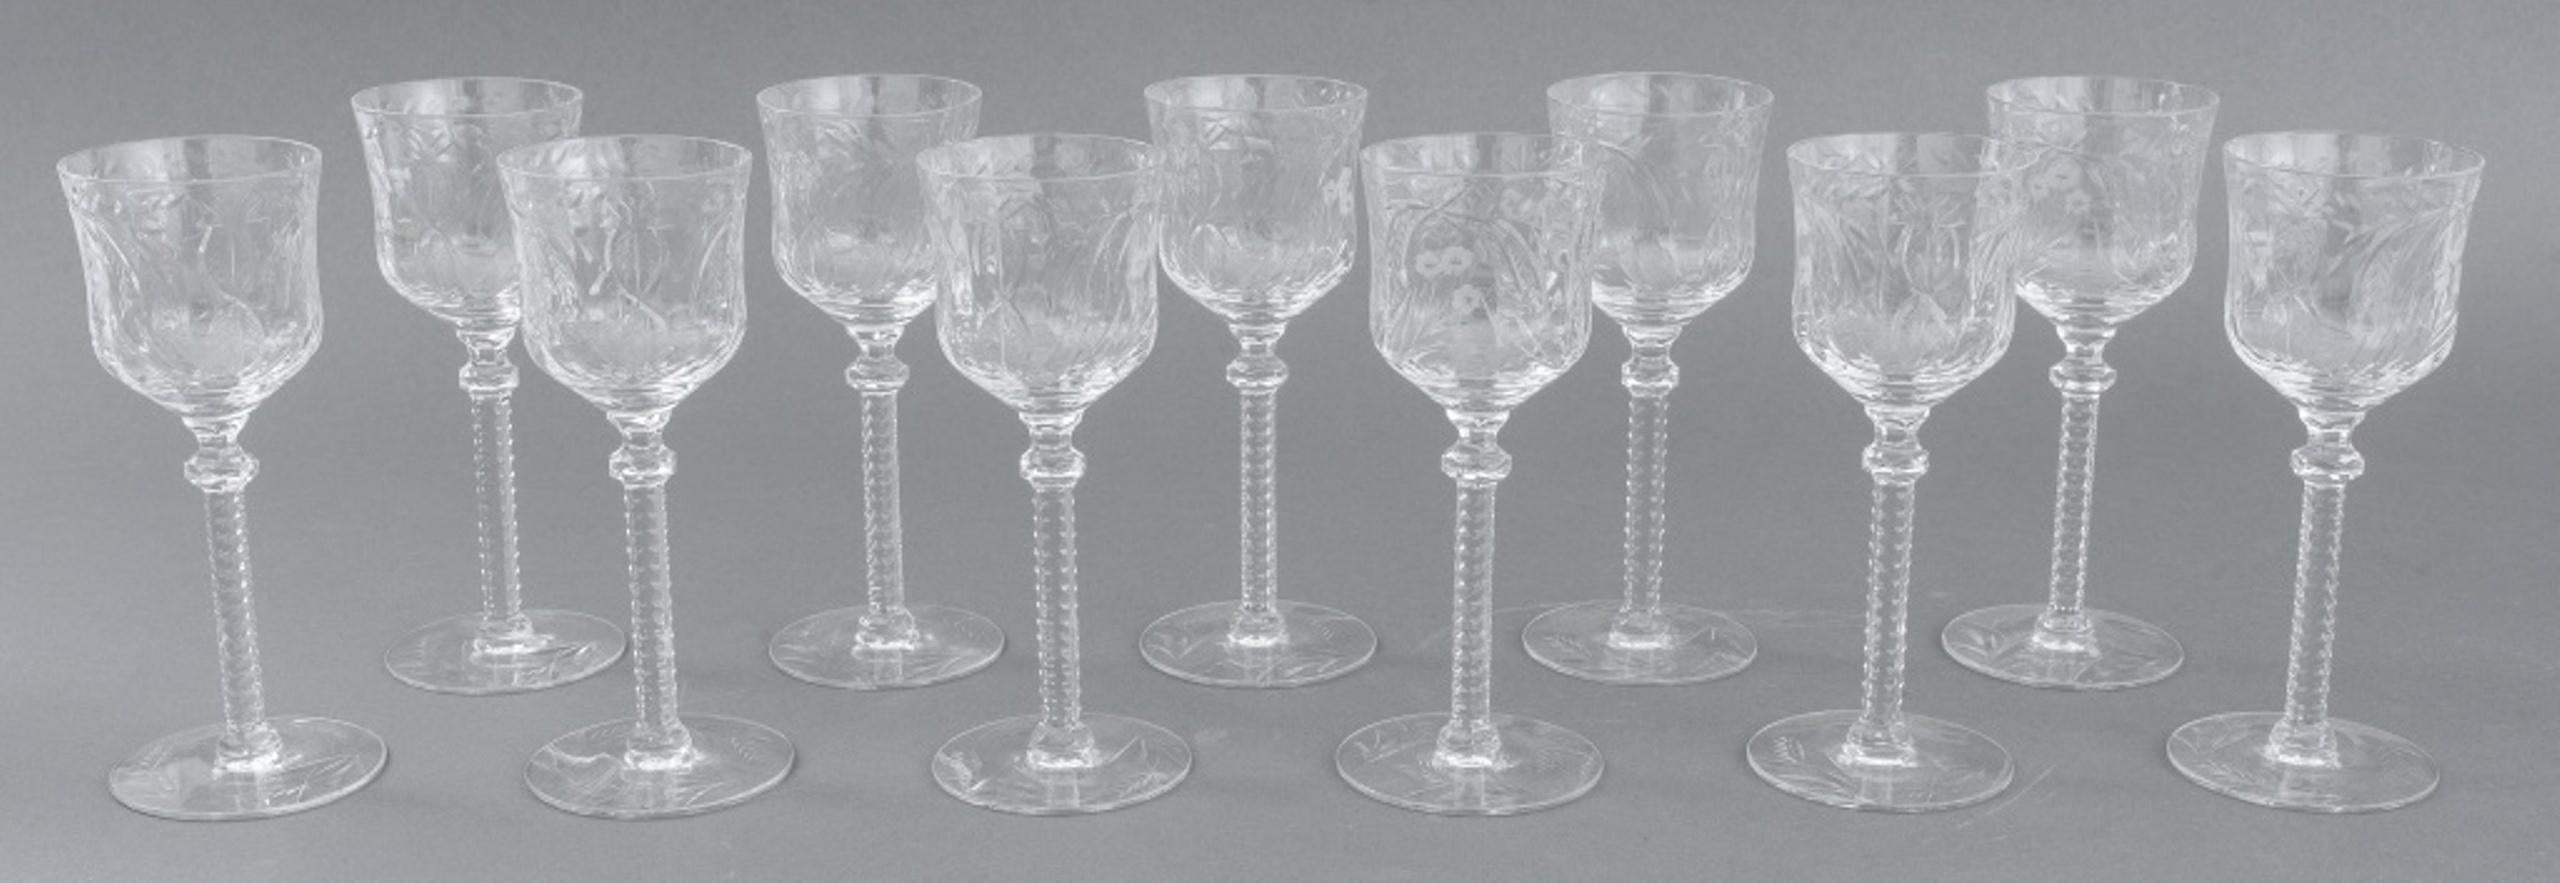 Group of Libbey Rock Sharpe cut crystal glassware with floral and pineapple motifs comprising (11) eleven champagne coupes, (16) wine glasses, (6) six tall wine glasses, (11) eleven sherry glasses and (8) eight cordial glasses, apparently